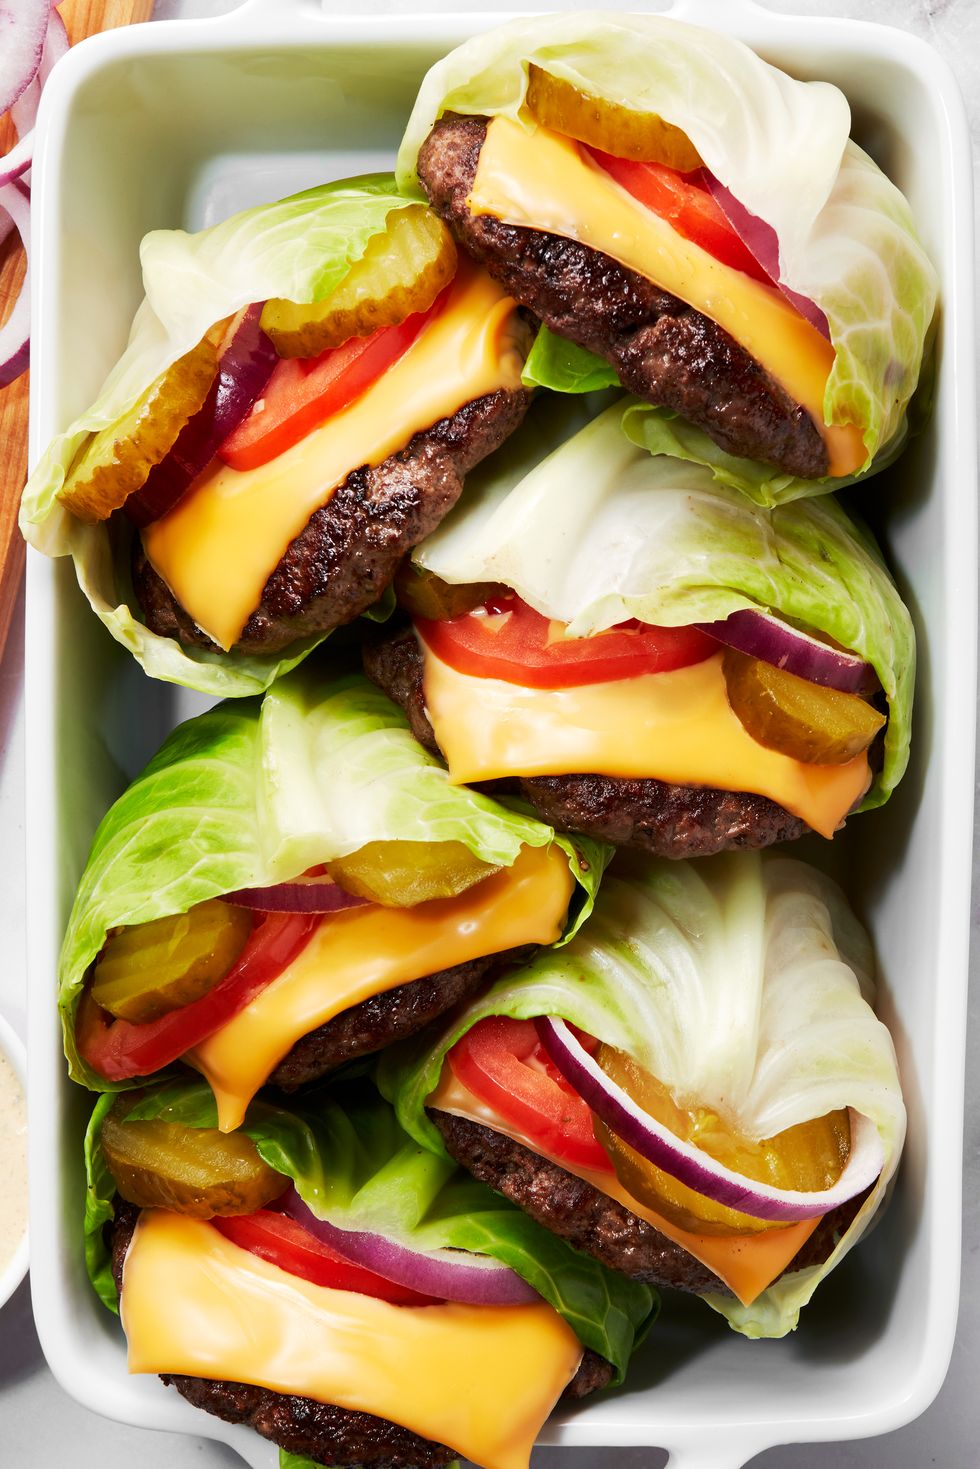 cheesburger with tomato wrapped inside cabbage